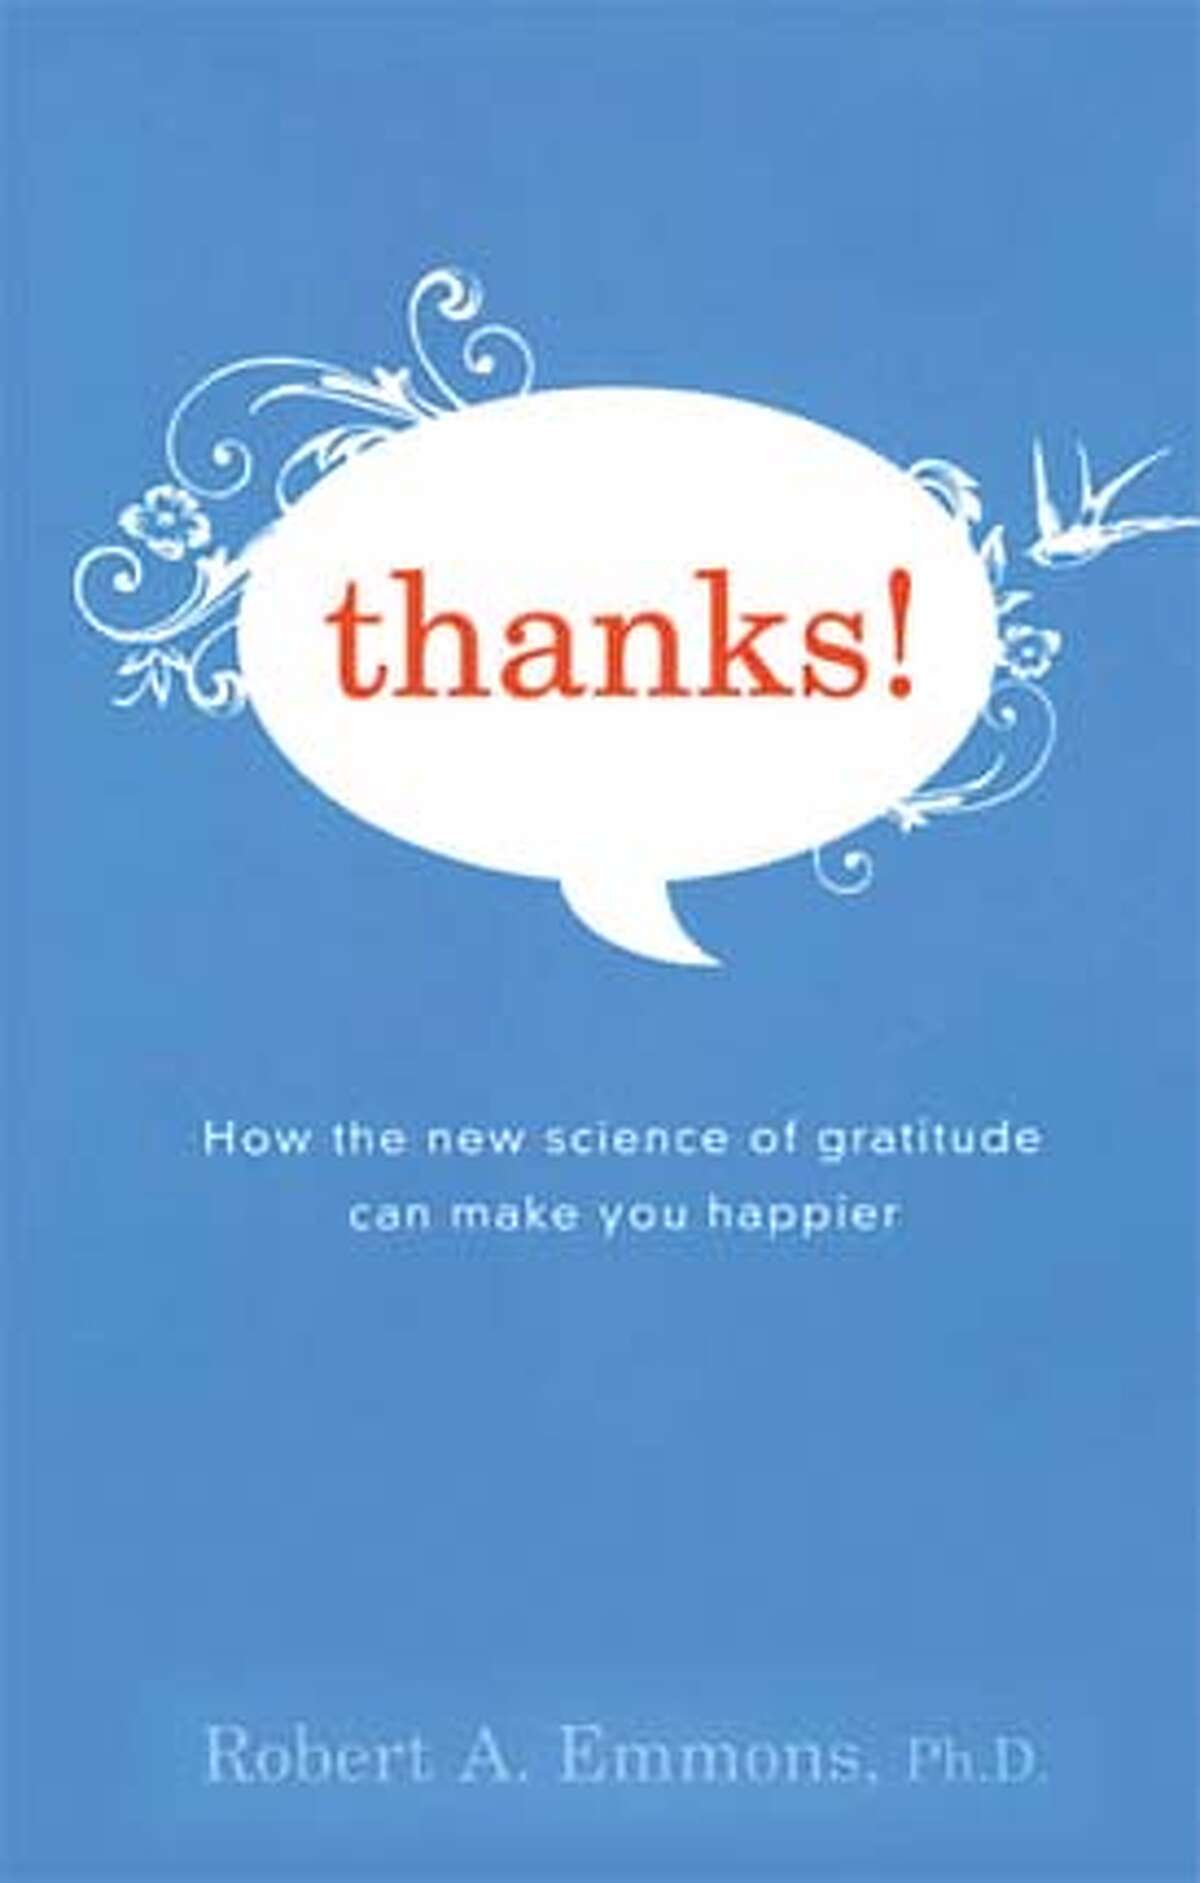 "Thanks! How the New Science of Gratitude Can Make You Happier," by Robert A. Emmons.